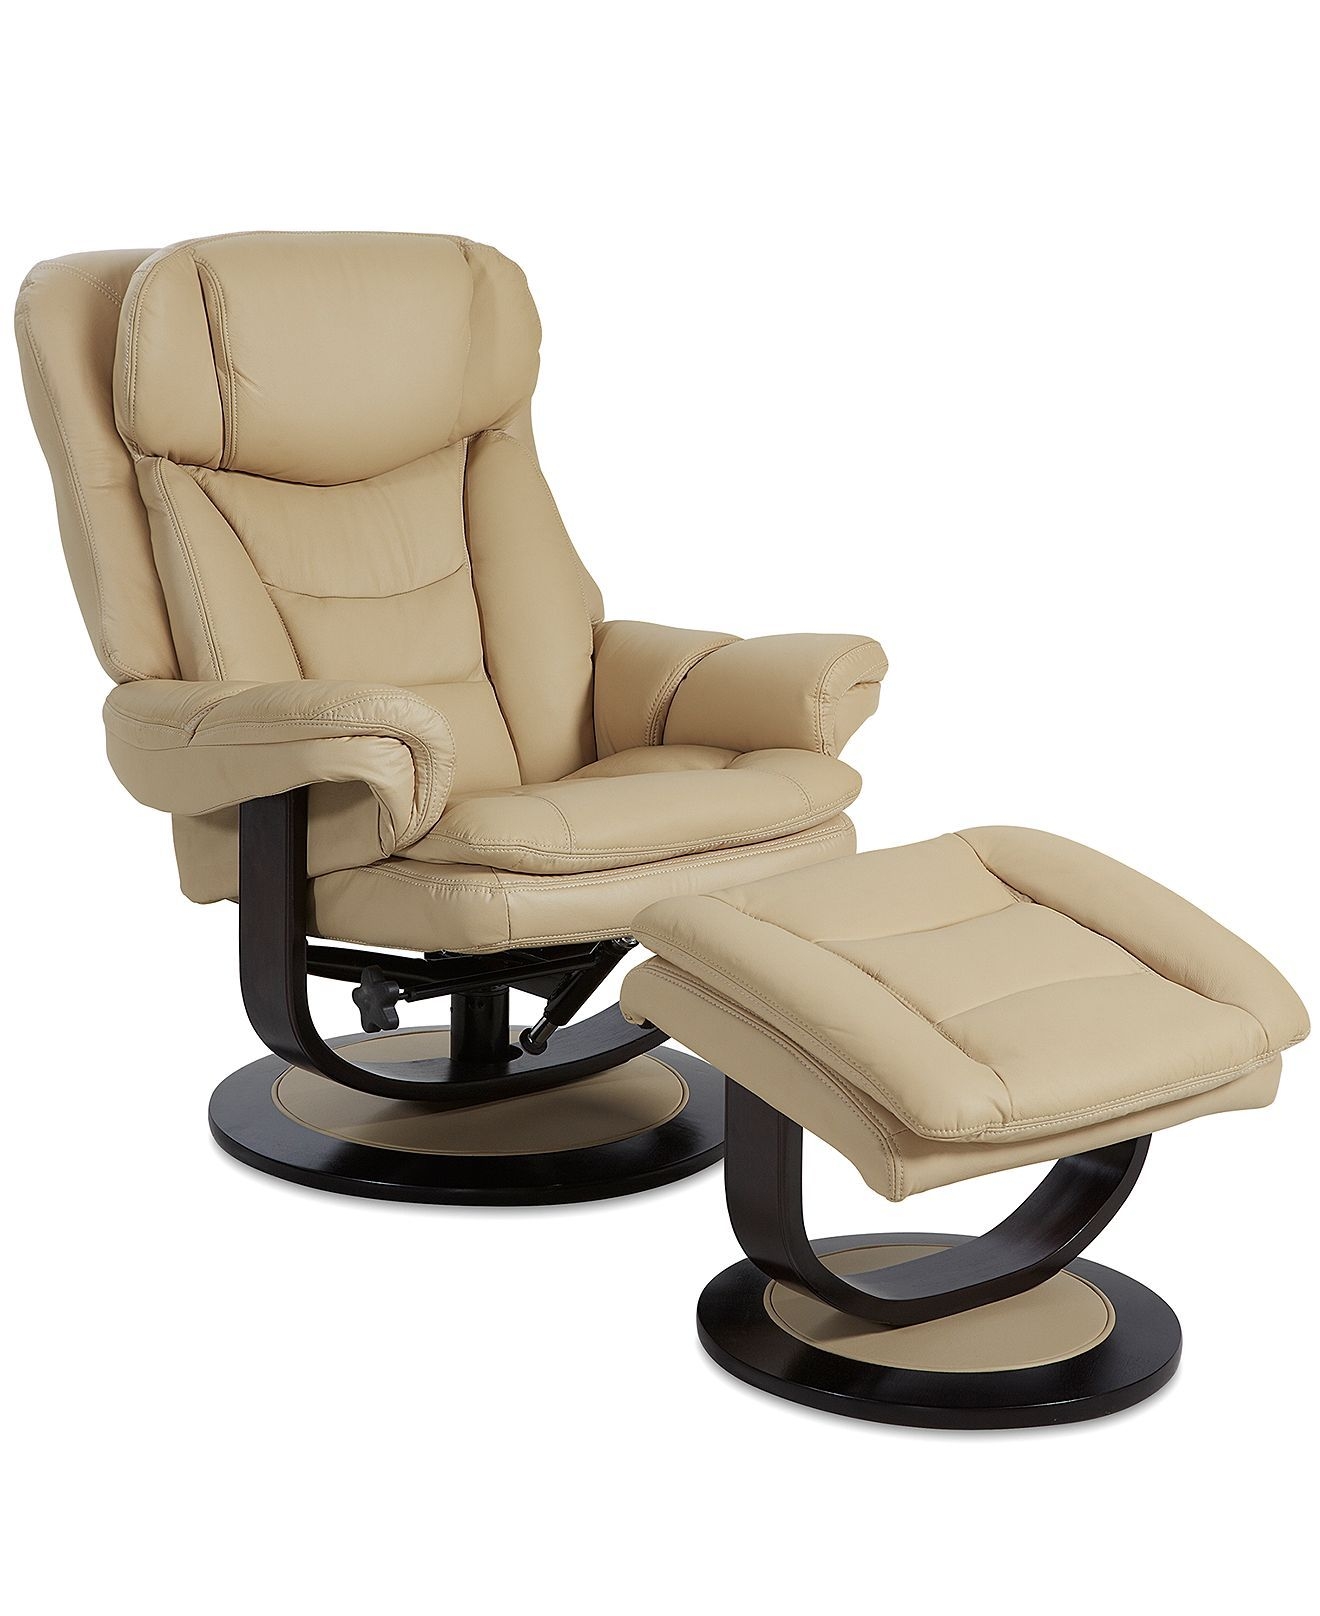 Leather recliner chair with ottoman 1